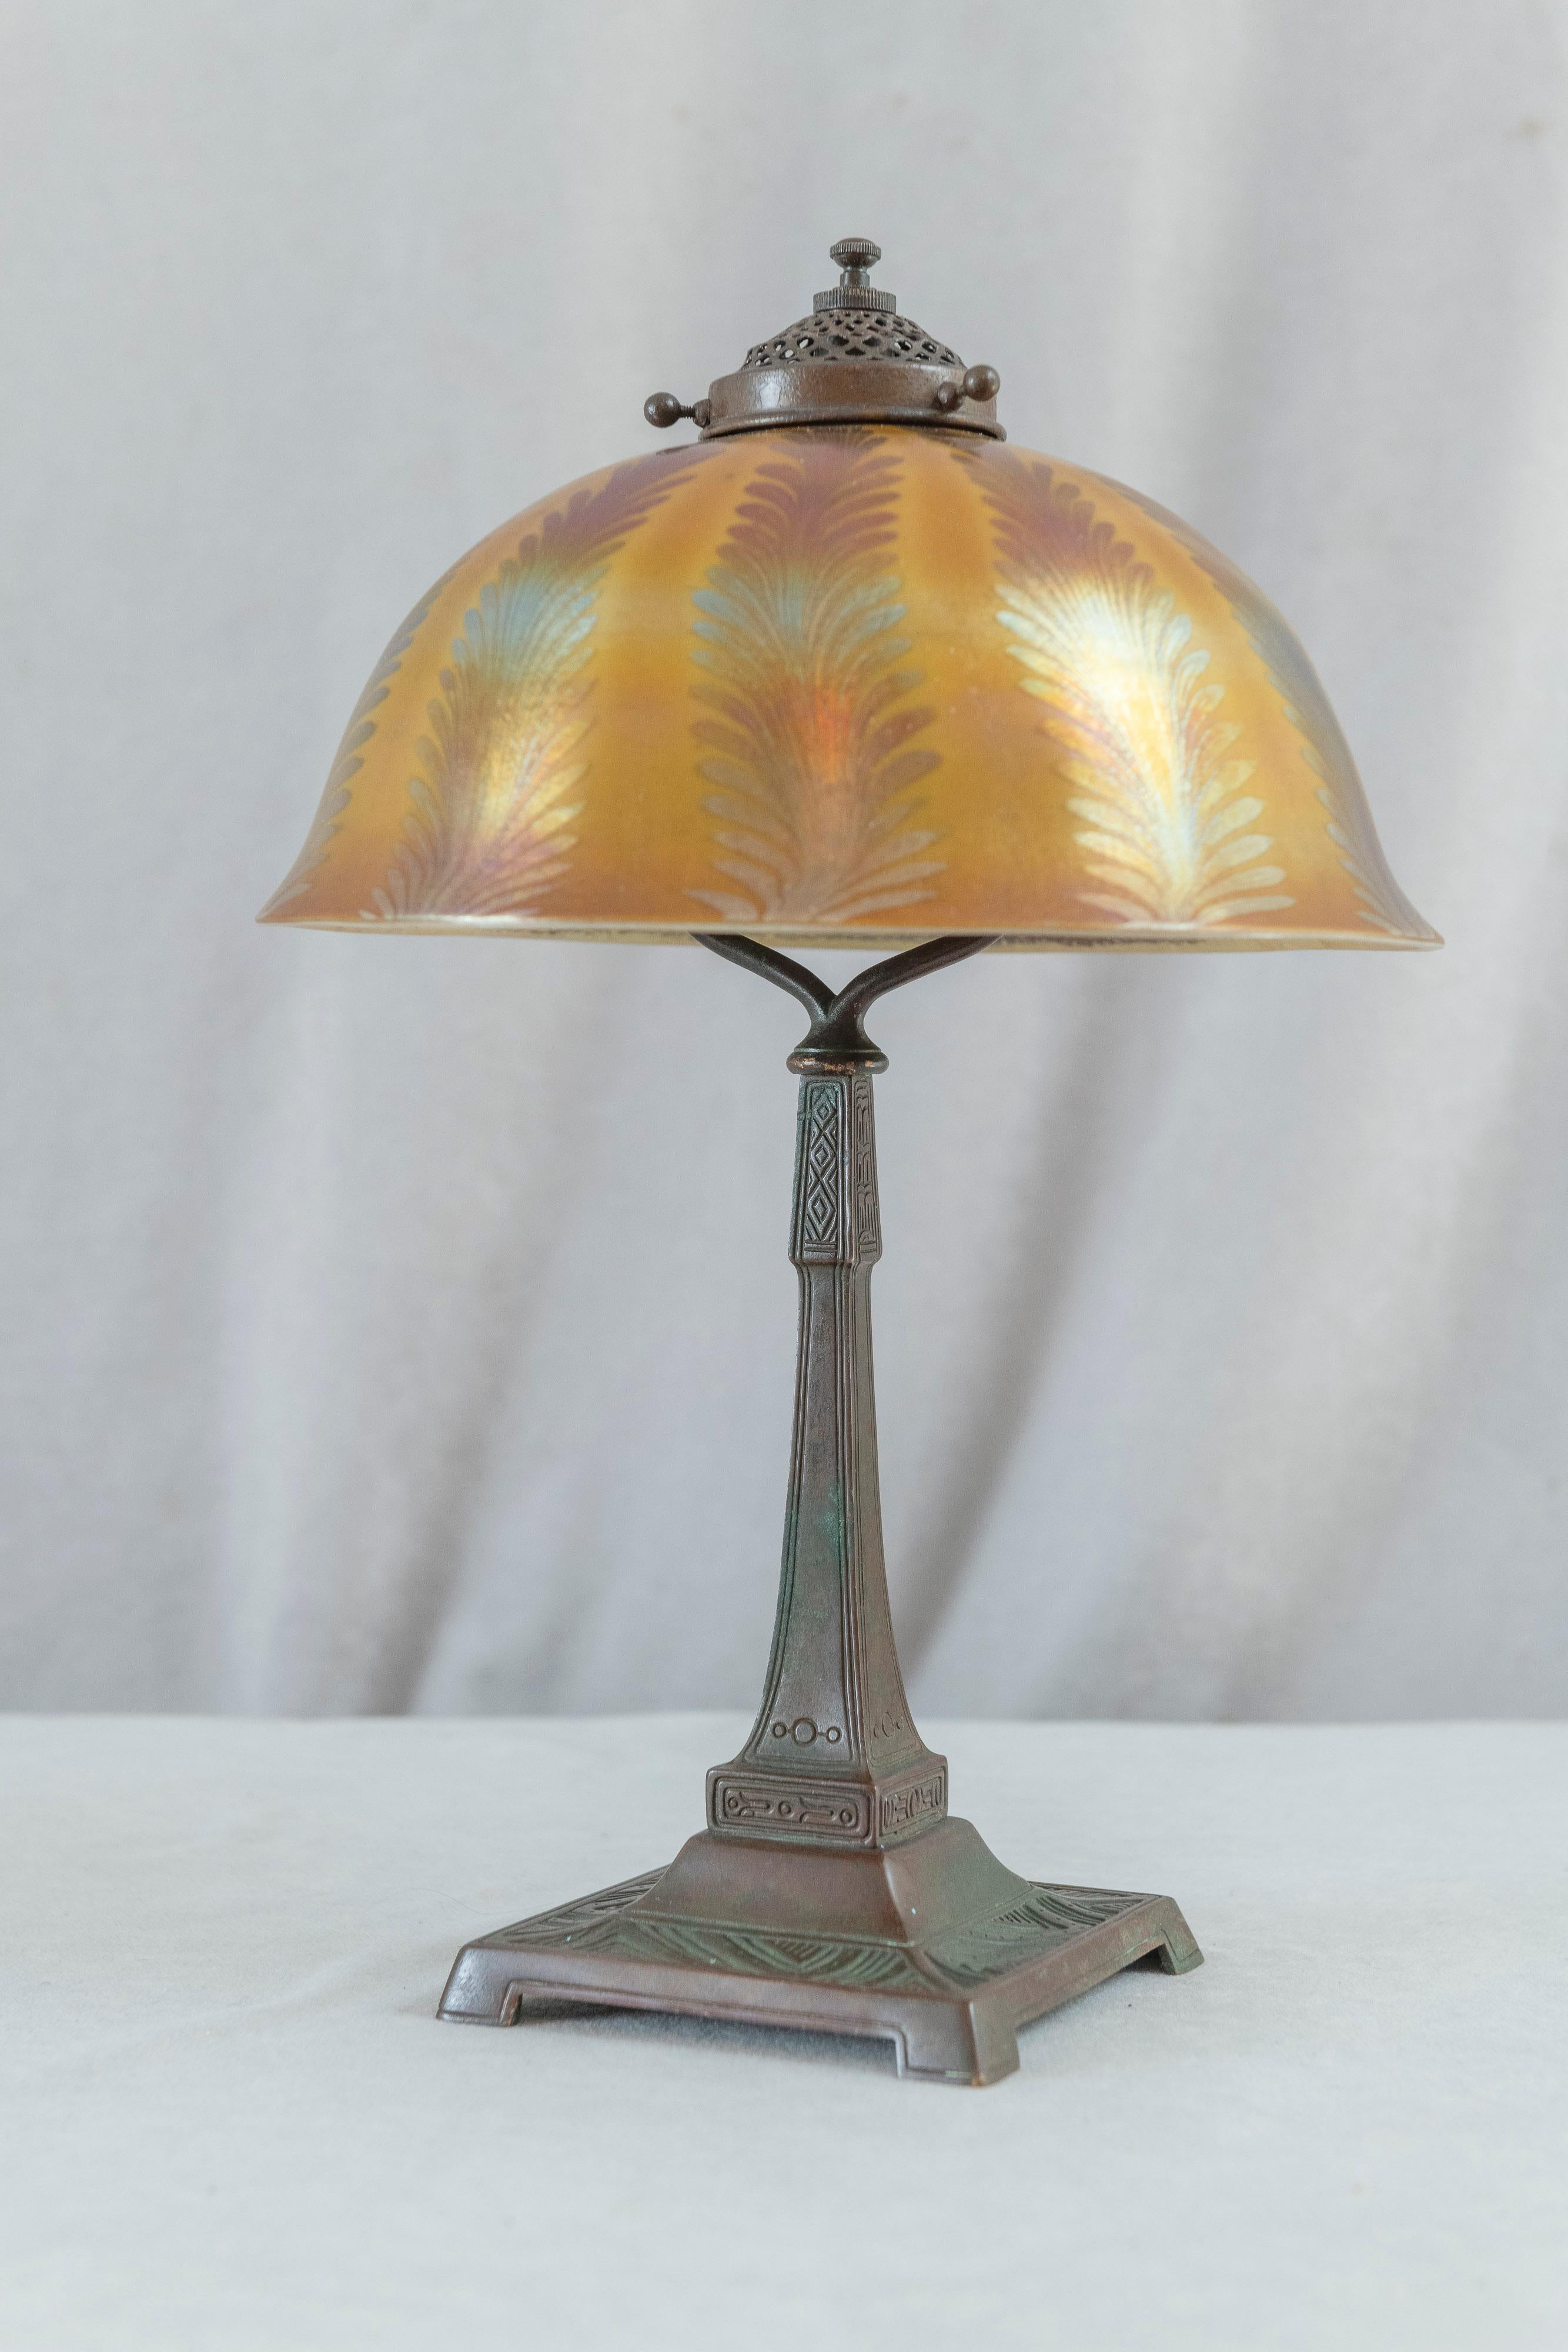 Art Nouveau Tiffany Studios Table Lamp w/Hand Blown Art Glass Shade, All Signed, ca. 1905